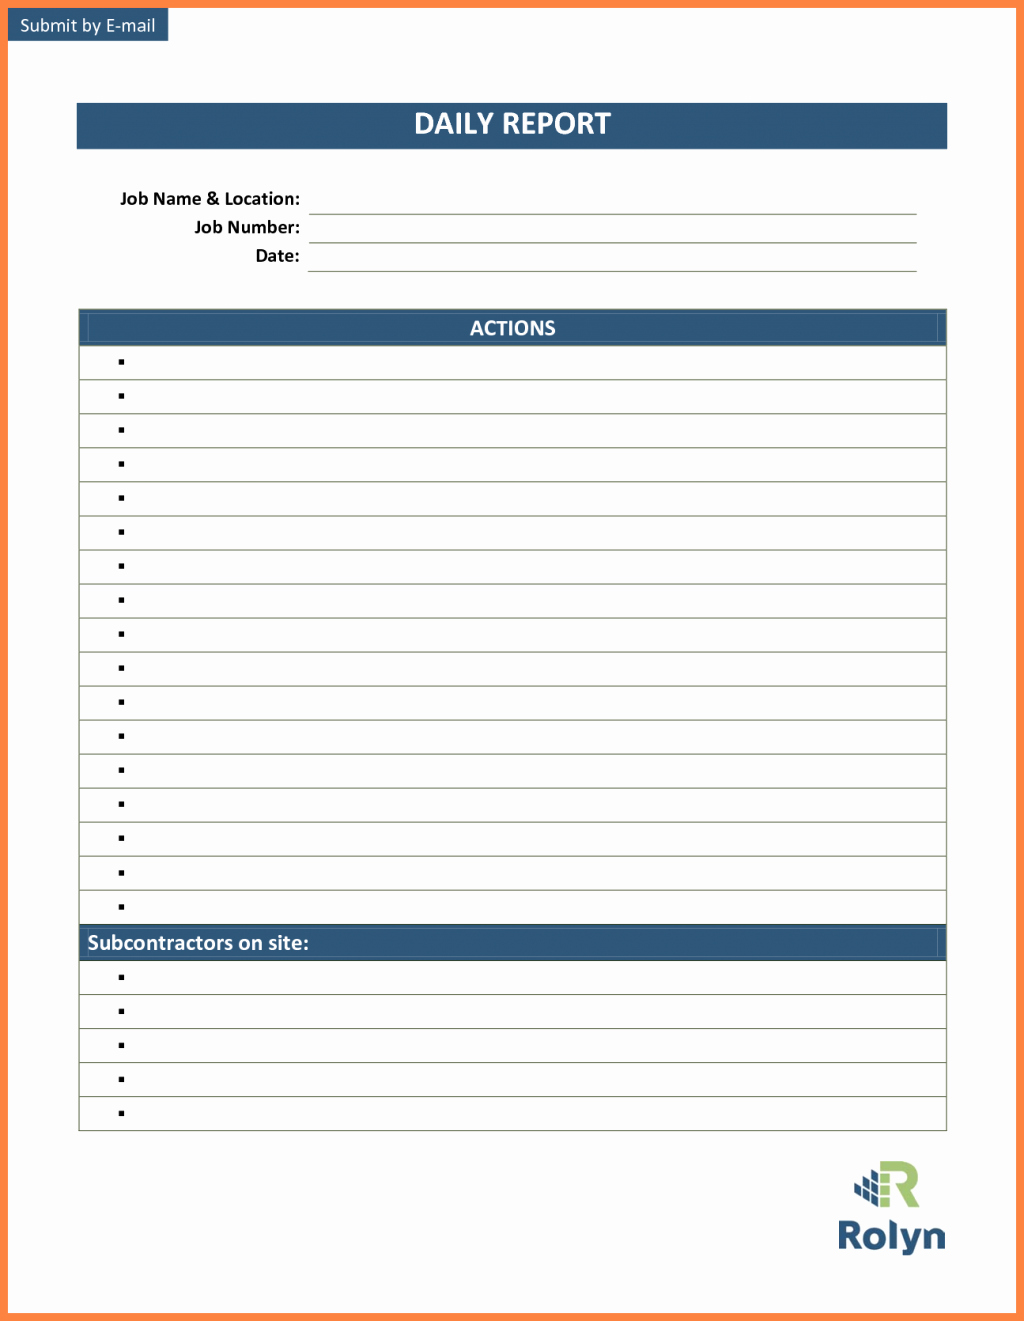 Daily Work Report Template New Daily Work Report format Doc Progress Template for